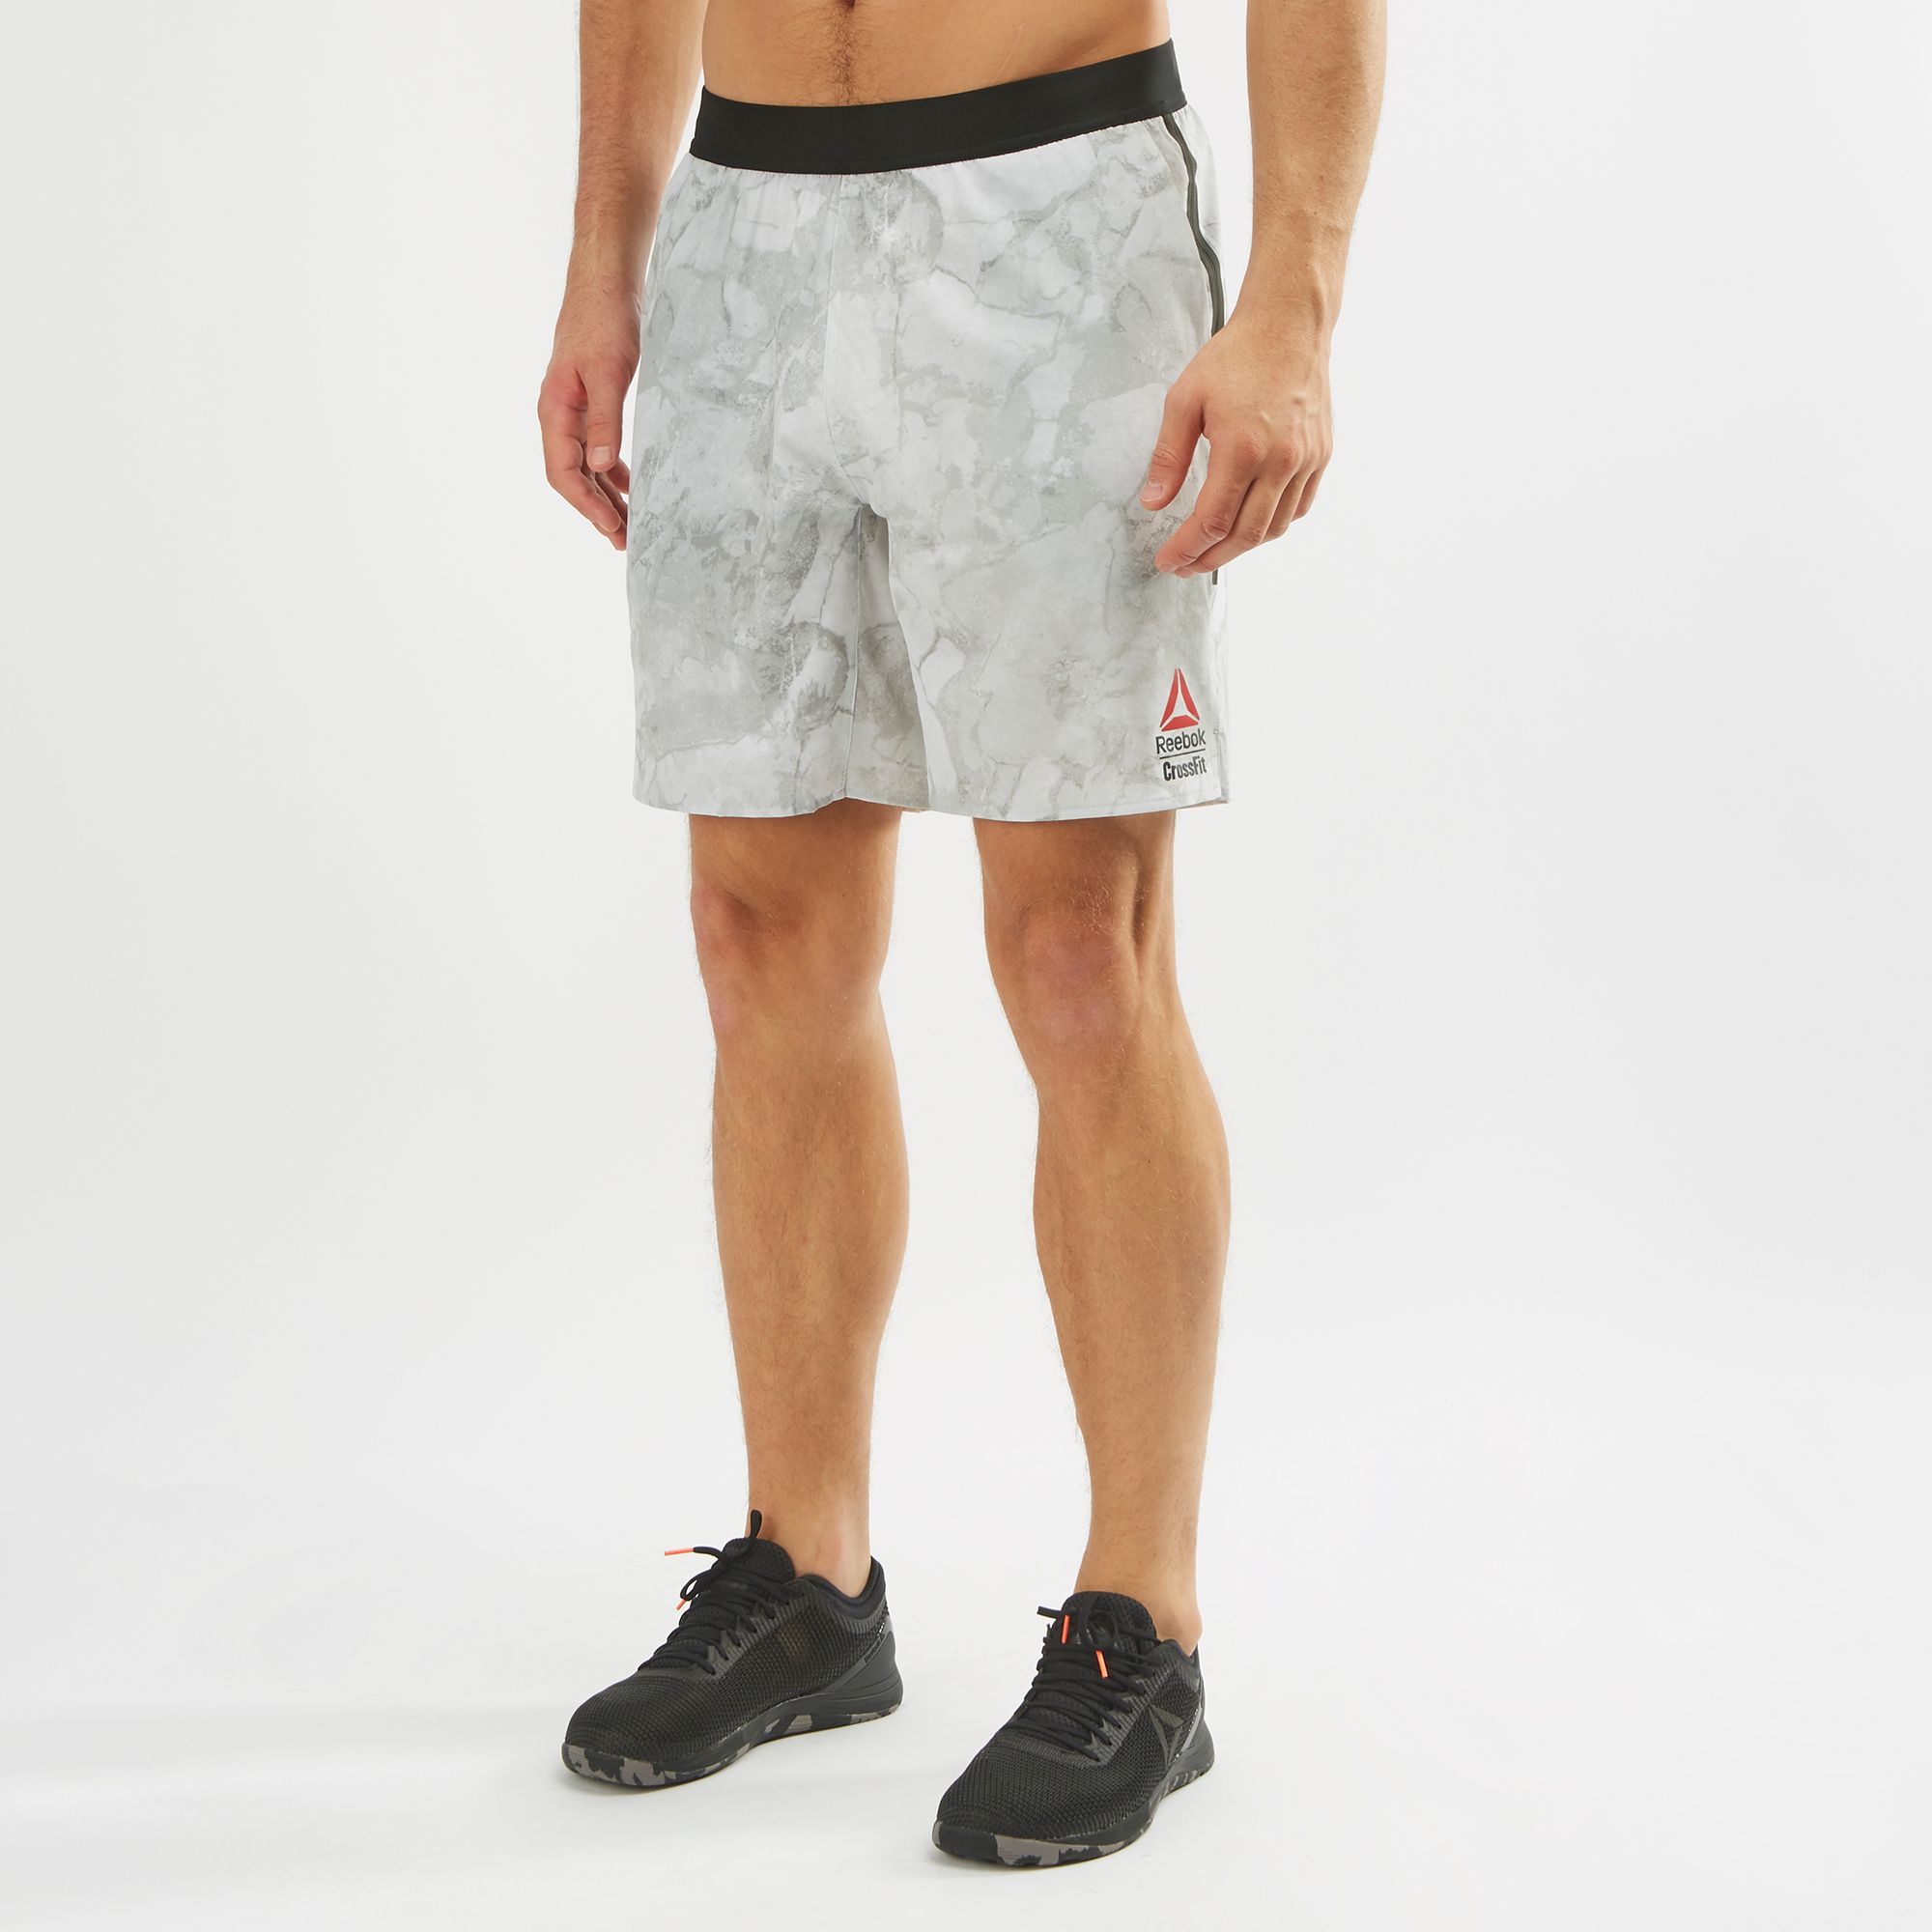 crossfit speed shorts - 63% OFF 